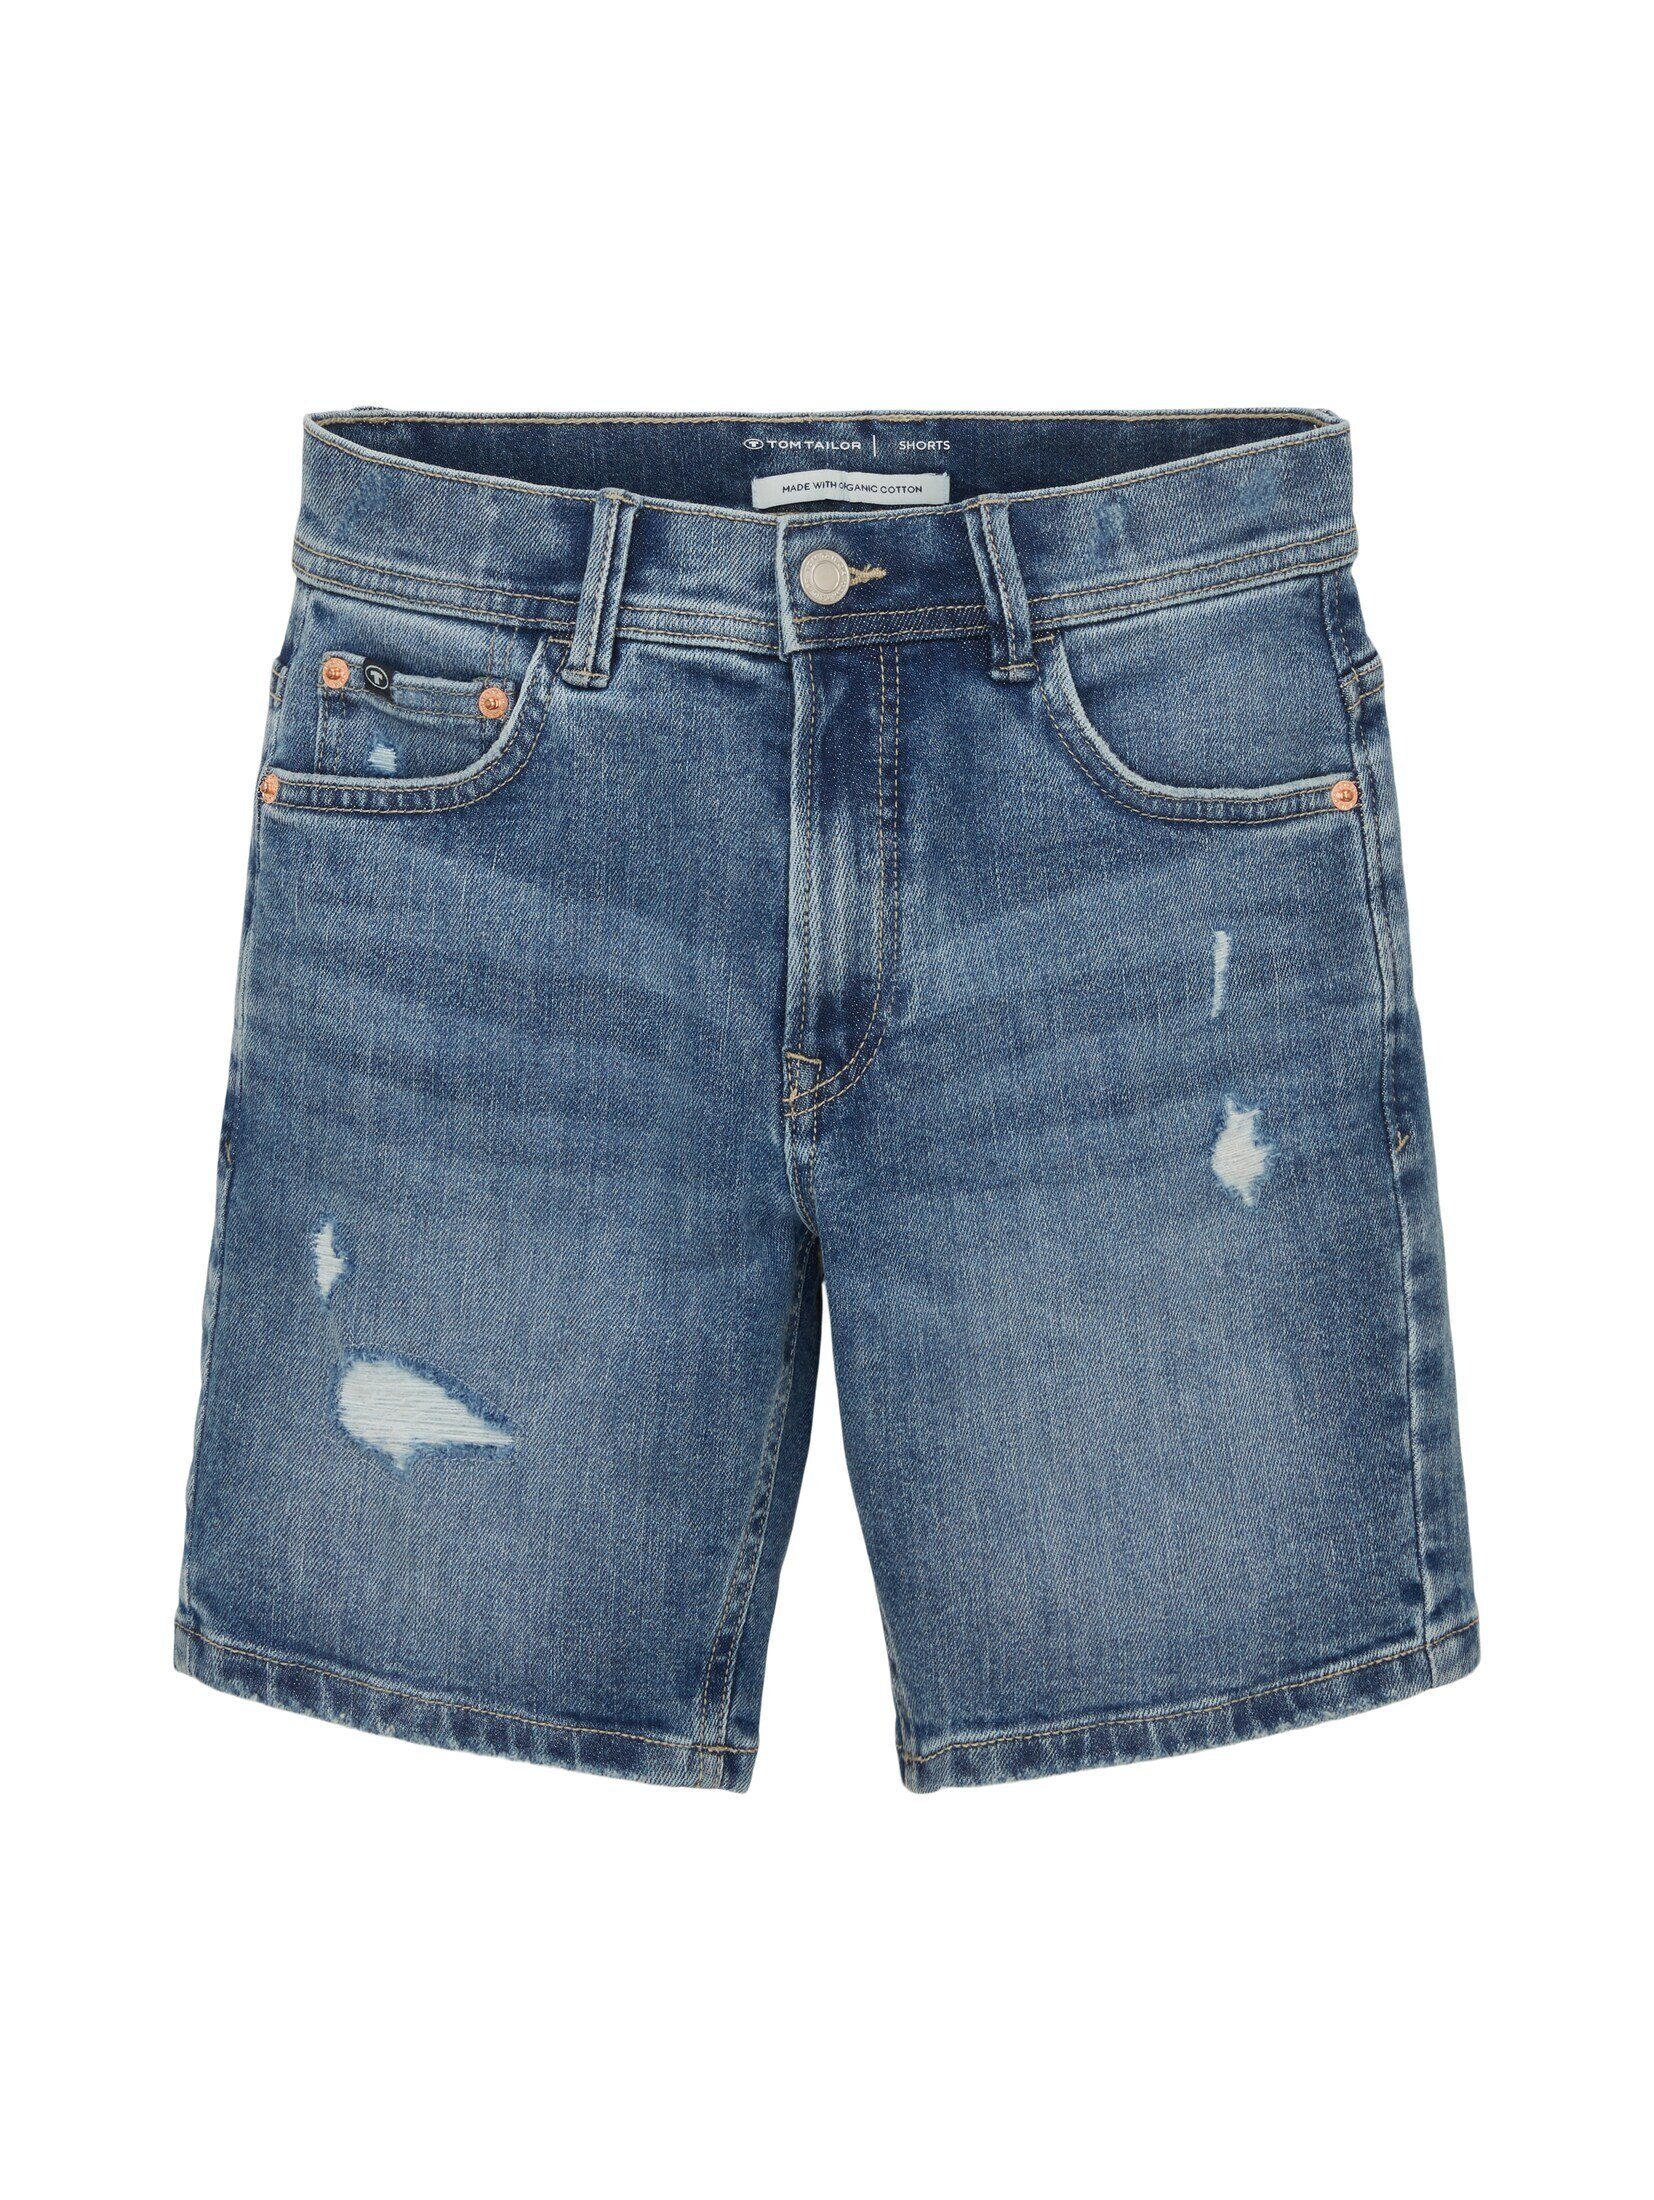 TOM TAILOR Jeansshorts im Jeansshorts Used-Look